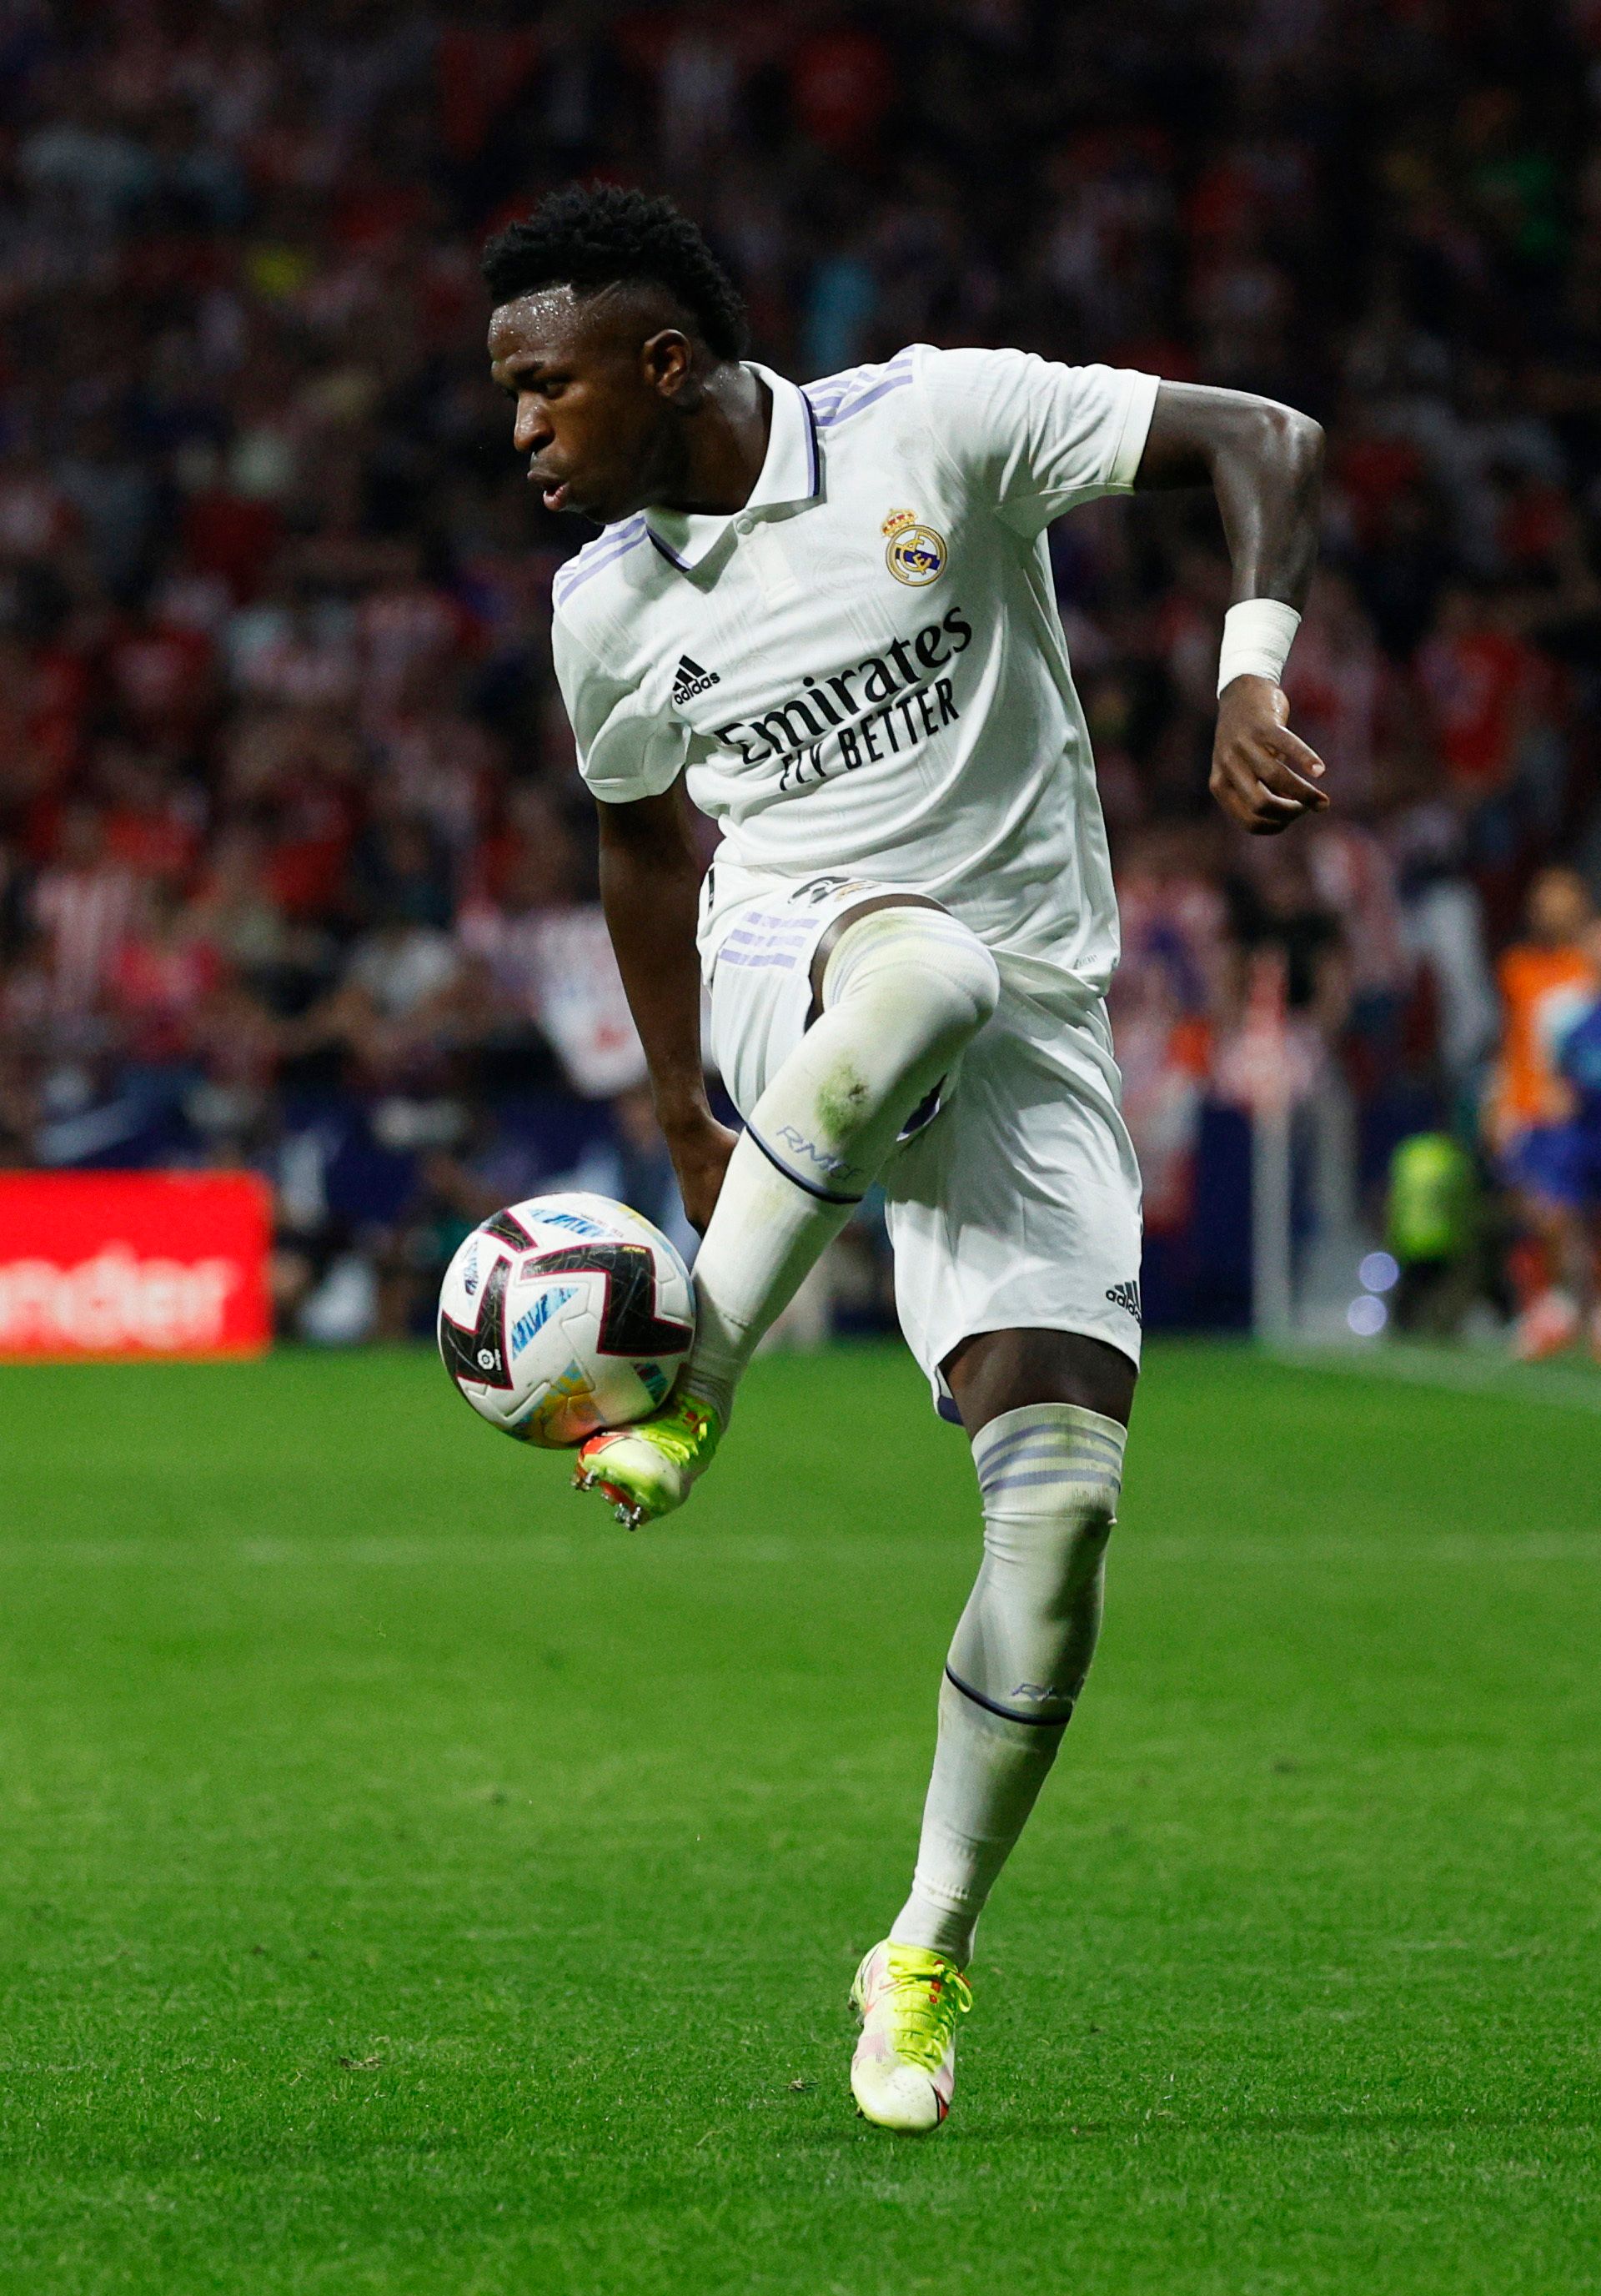 Vinicius Jr in action for Real Madrid